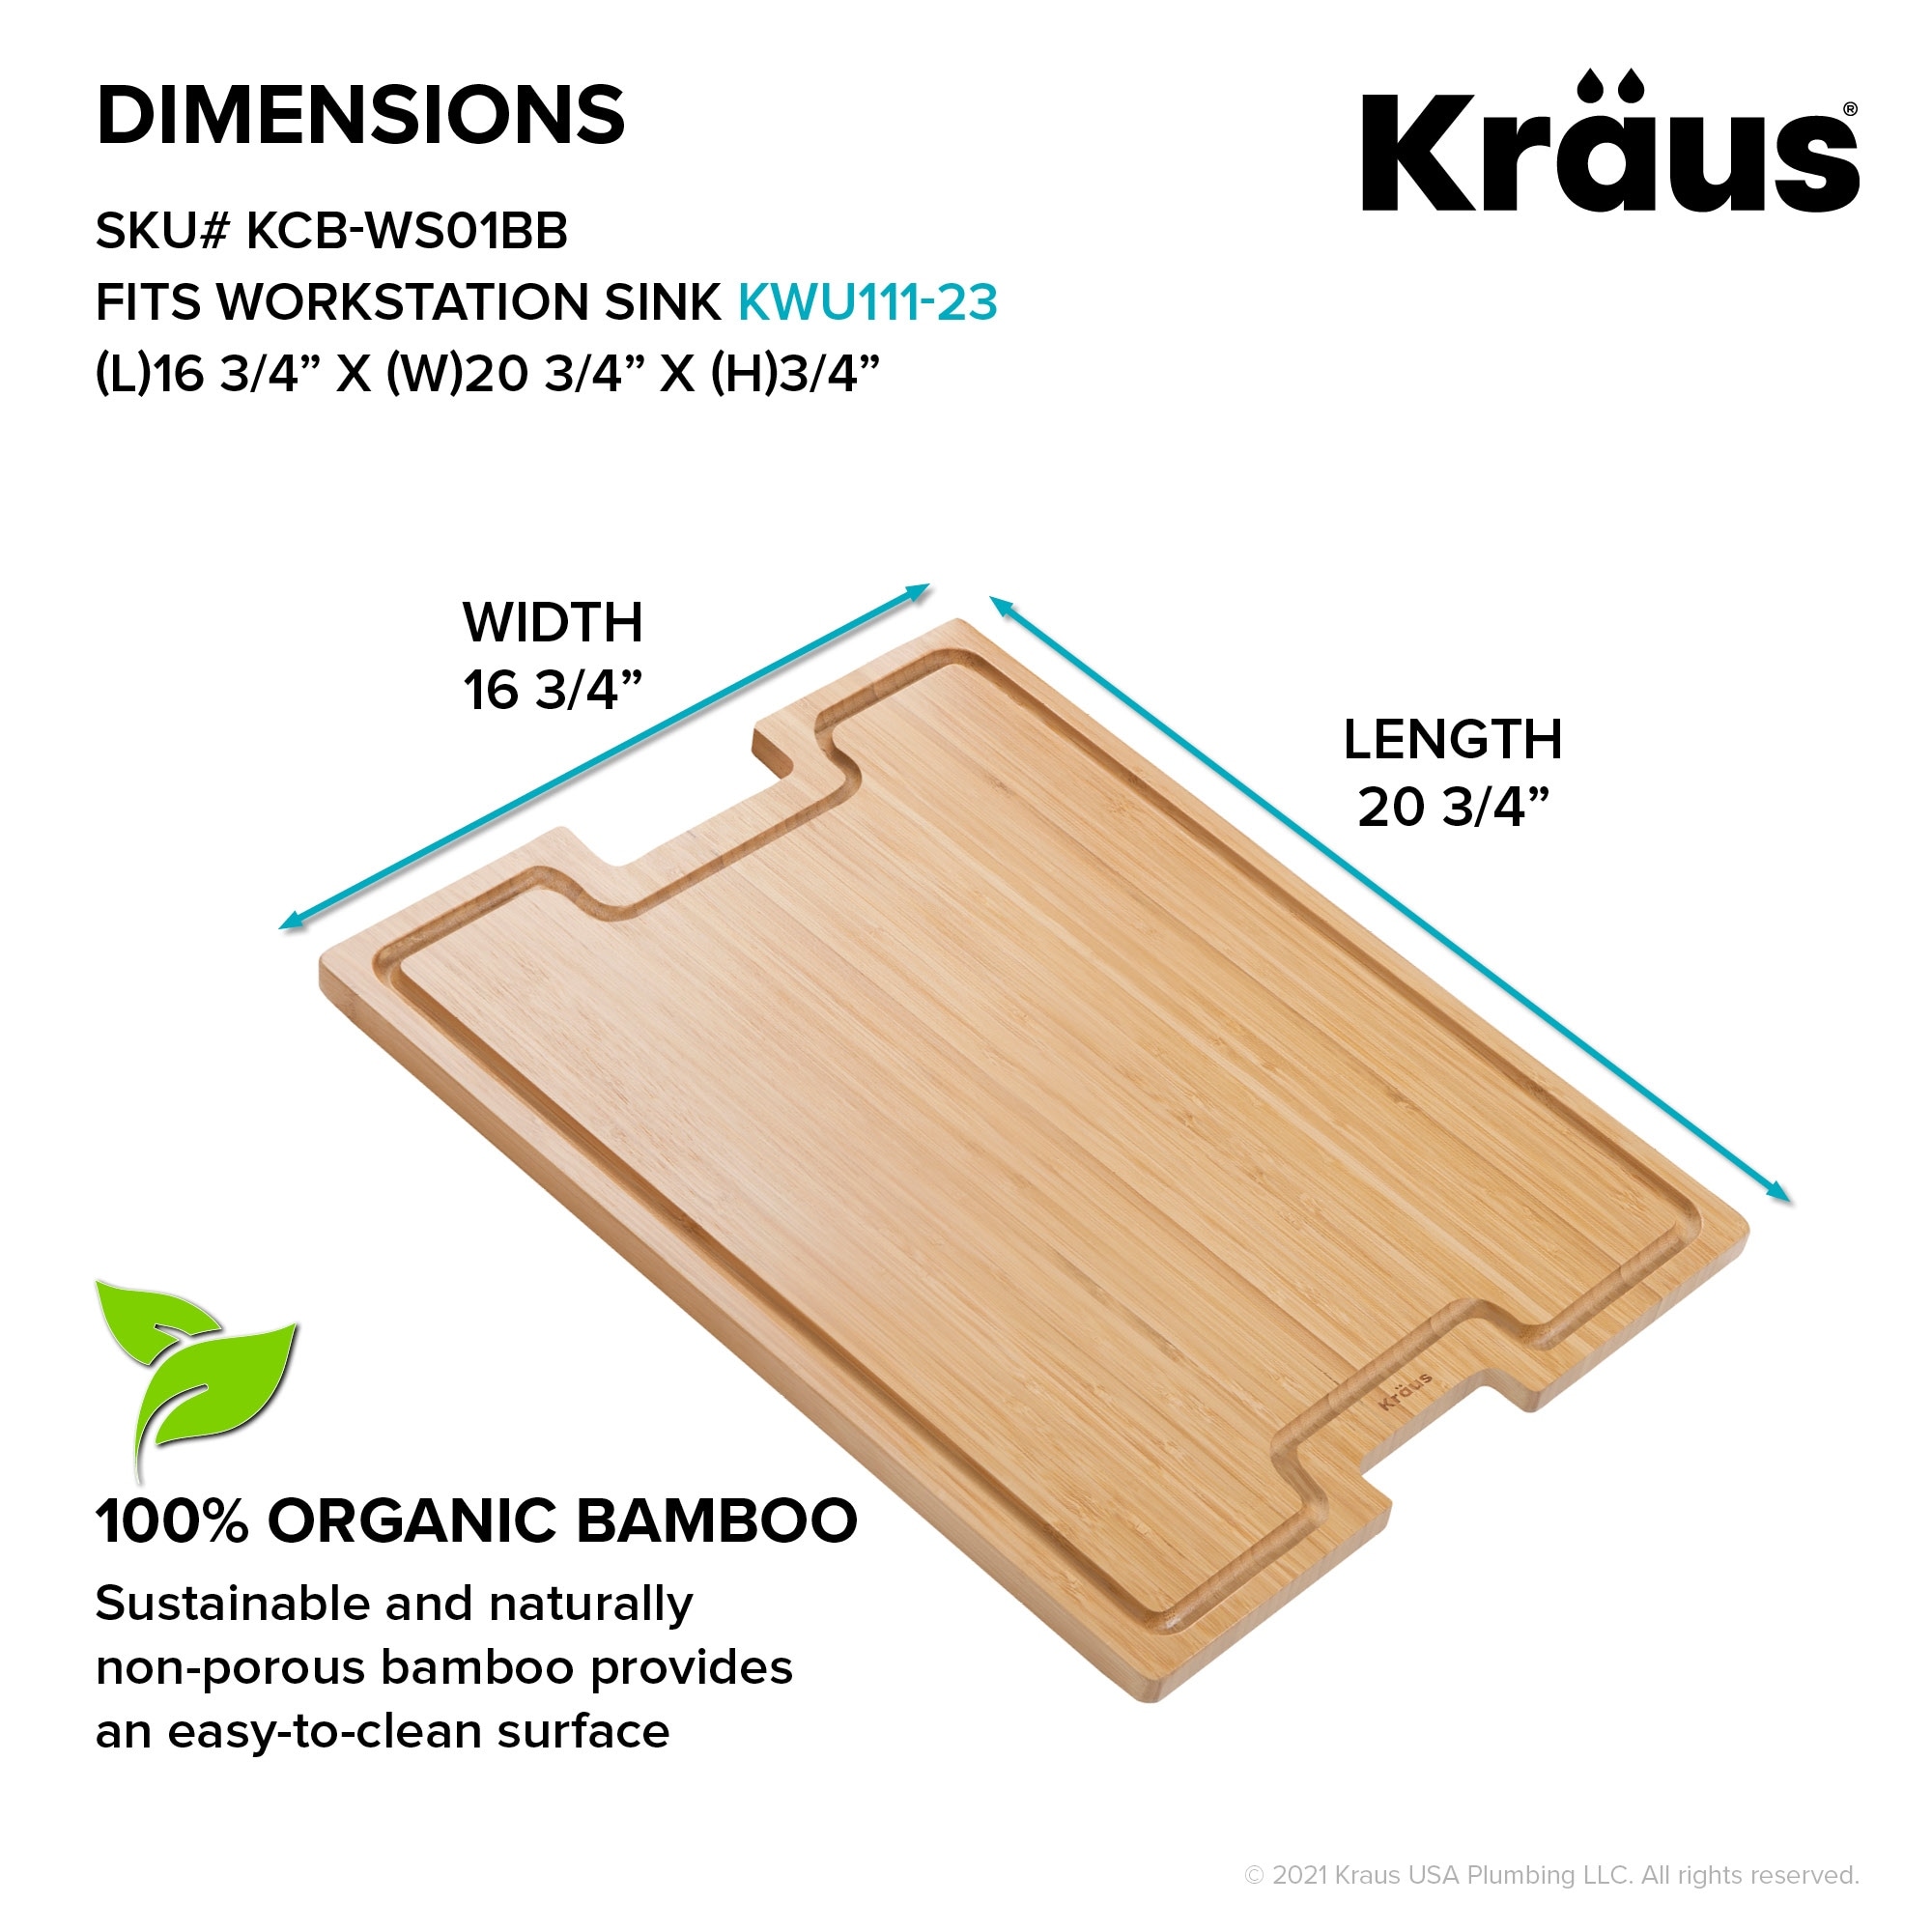 Kraus KCB-WS104BB Workstation Kitchen Sink 16 Solid Bamboo Cutting Board  in Bamboo